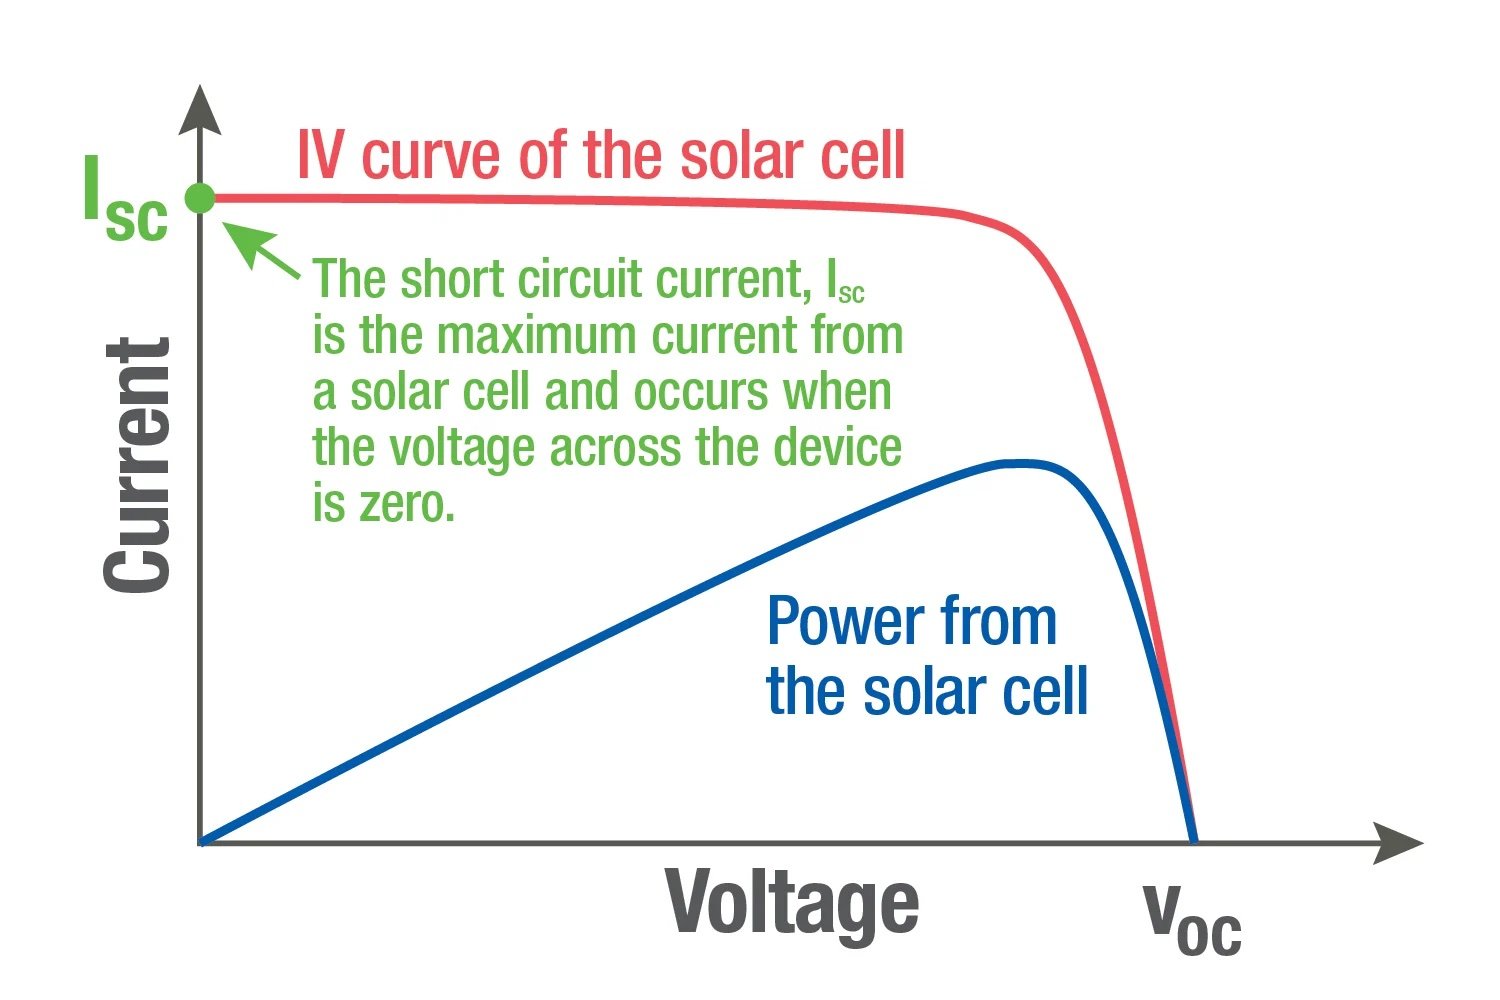 An I-V curve is a graphical representation of measured current (I) and power as a function of voltage (V)